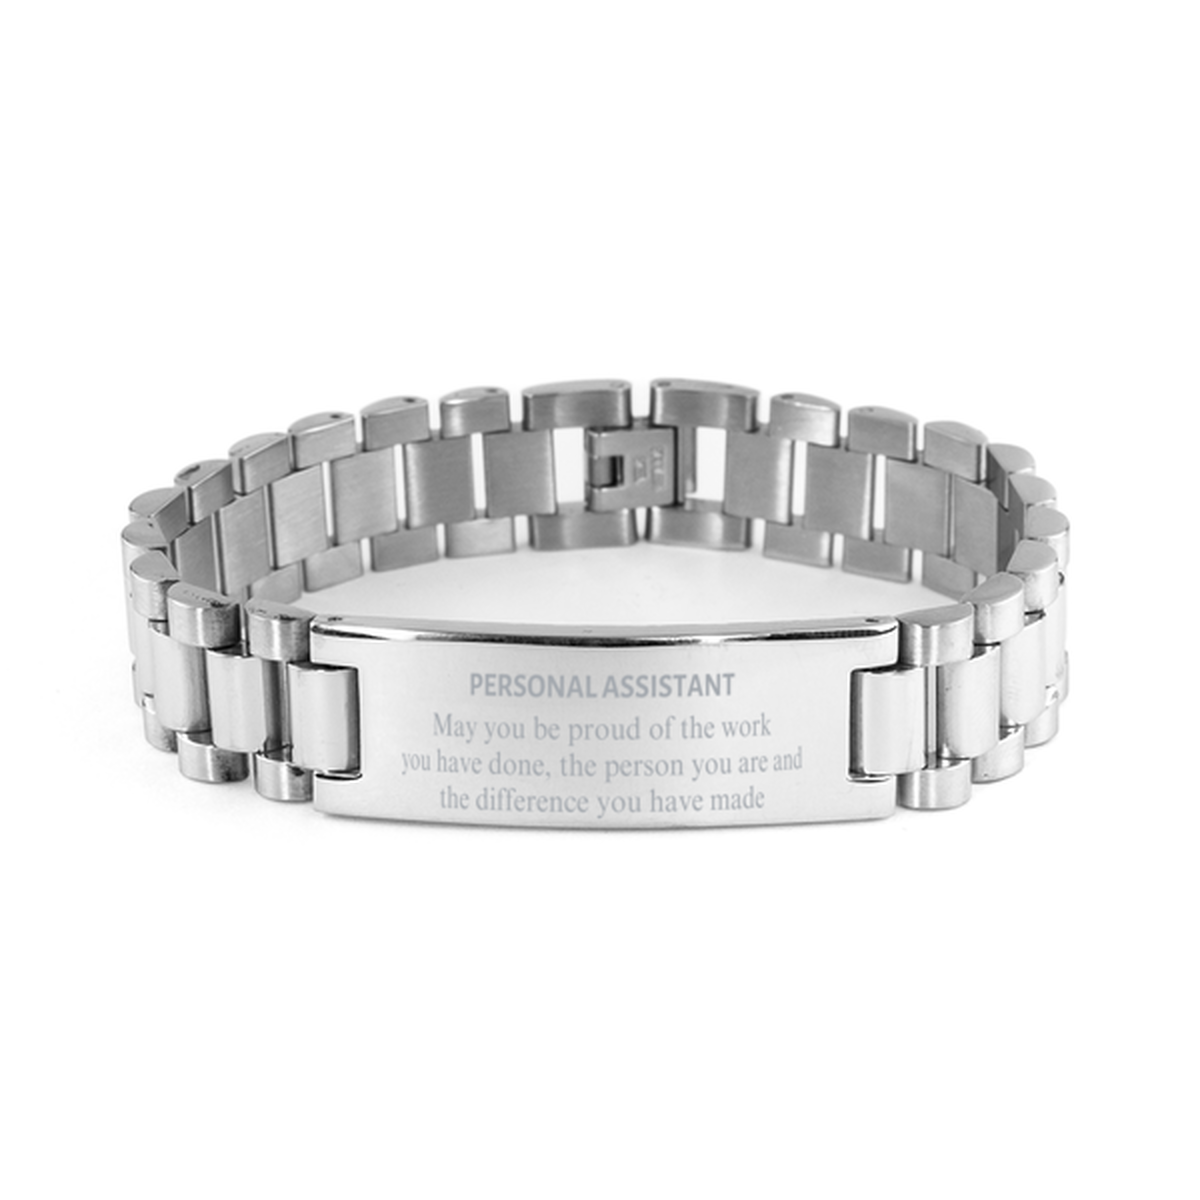 Personal Assistant May you be proud of the work you have done, Retirement Personal Assistant Ladder Stainless Steel Bracelet for Colleague Appreciation Gifts Amazing for Personal Assistant